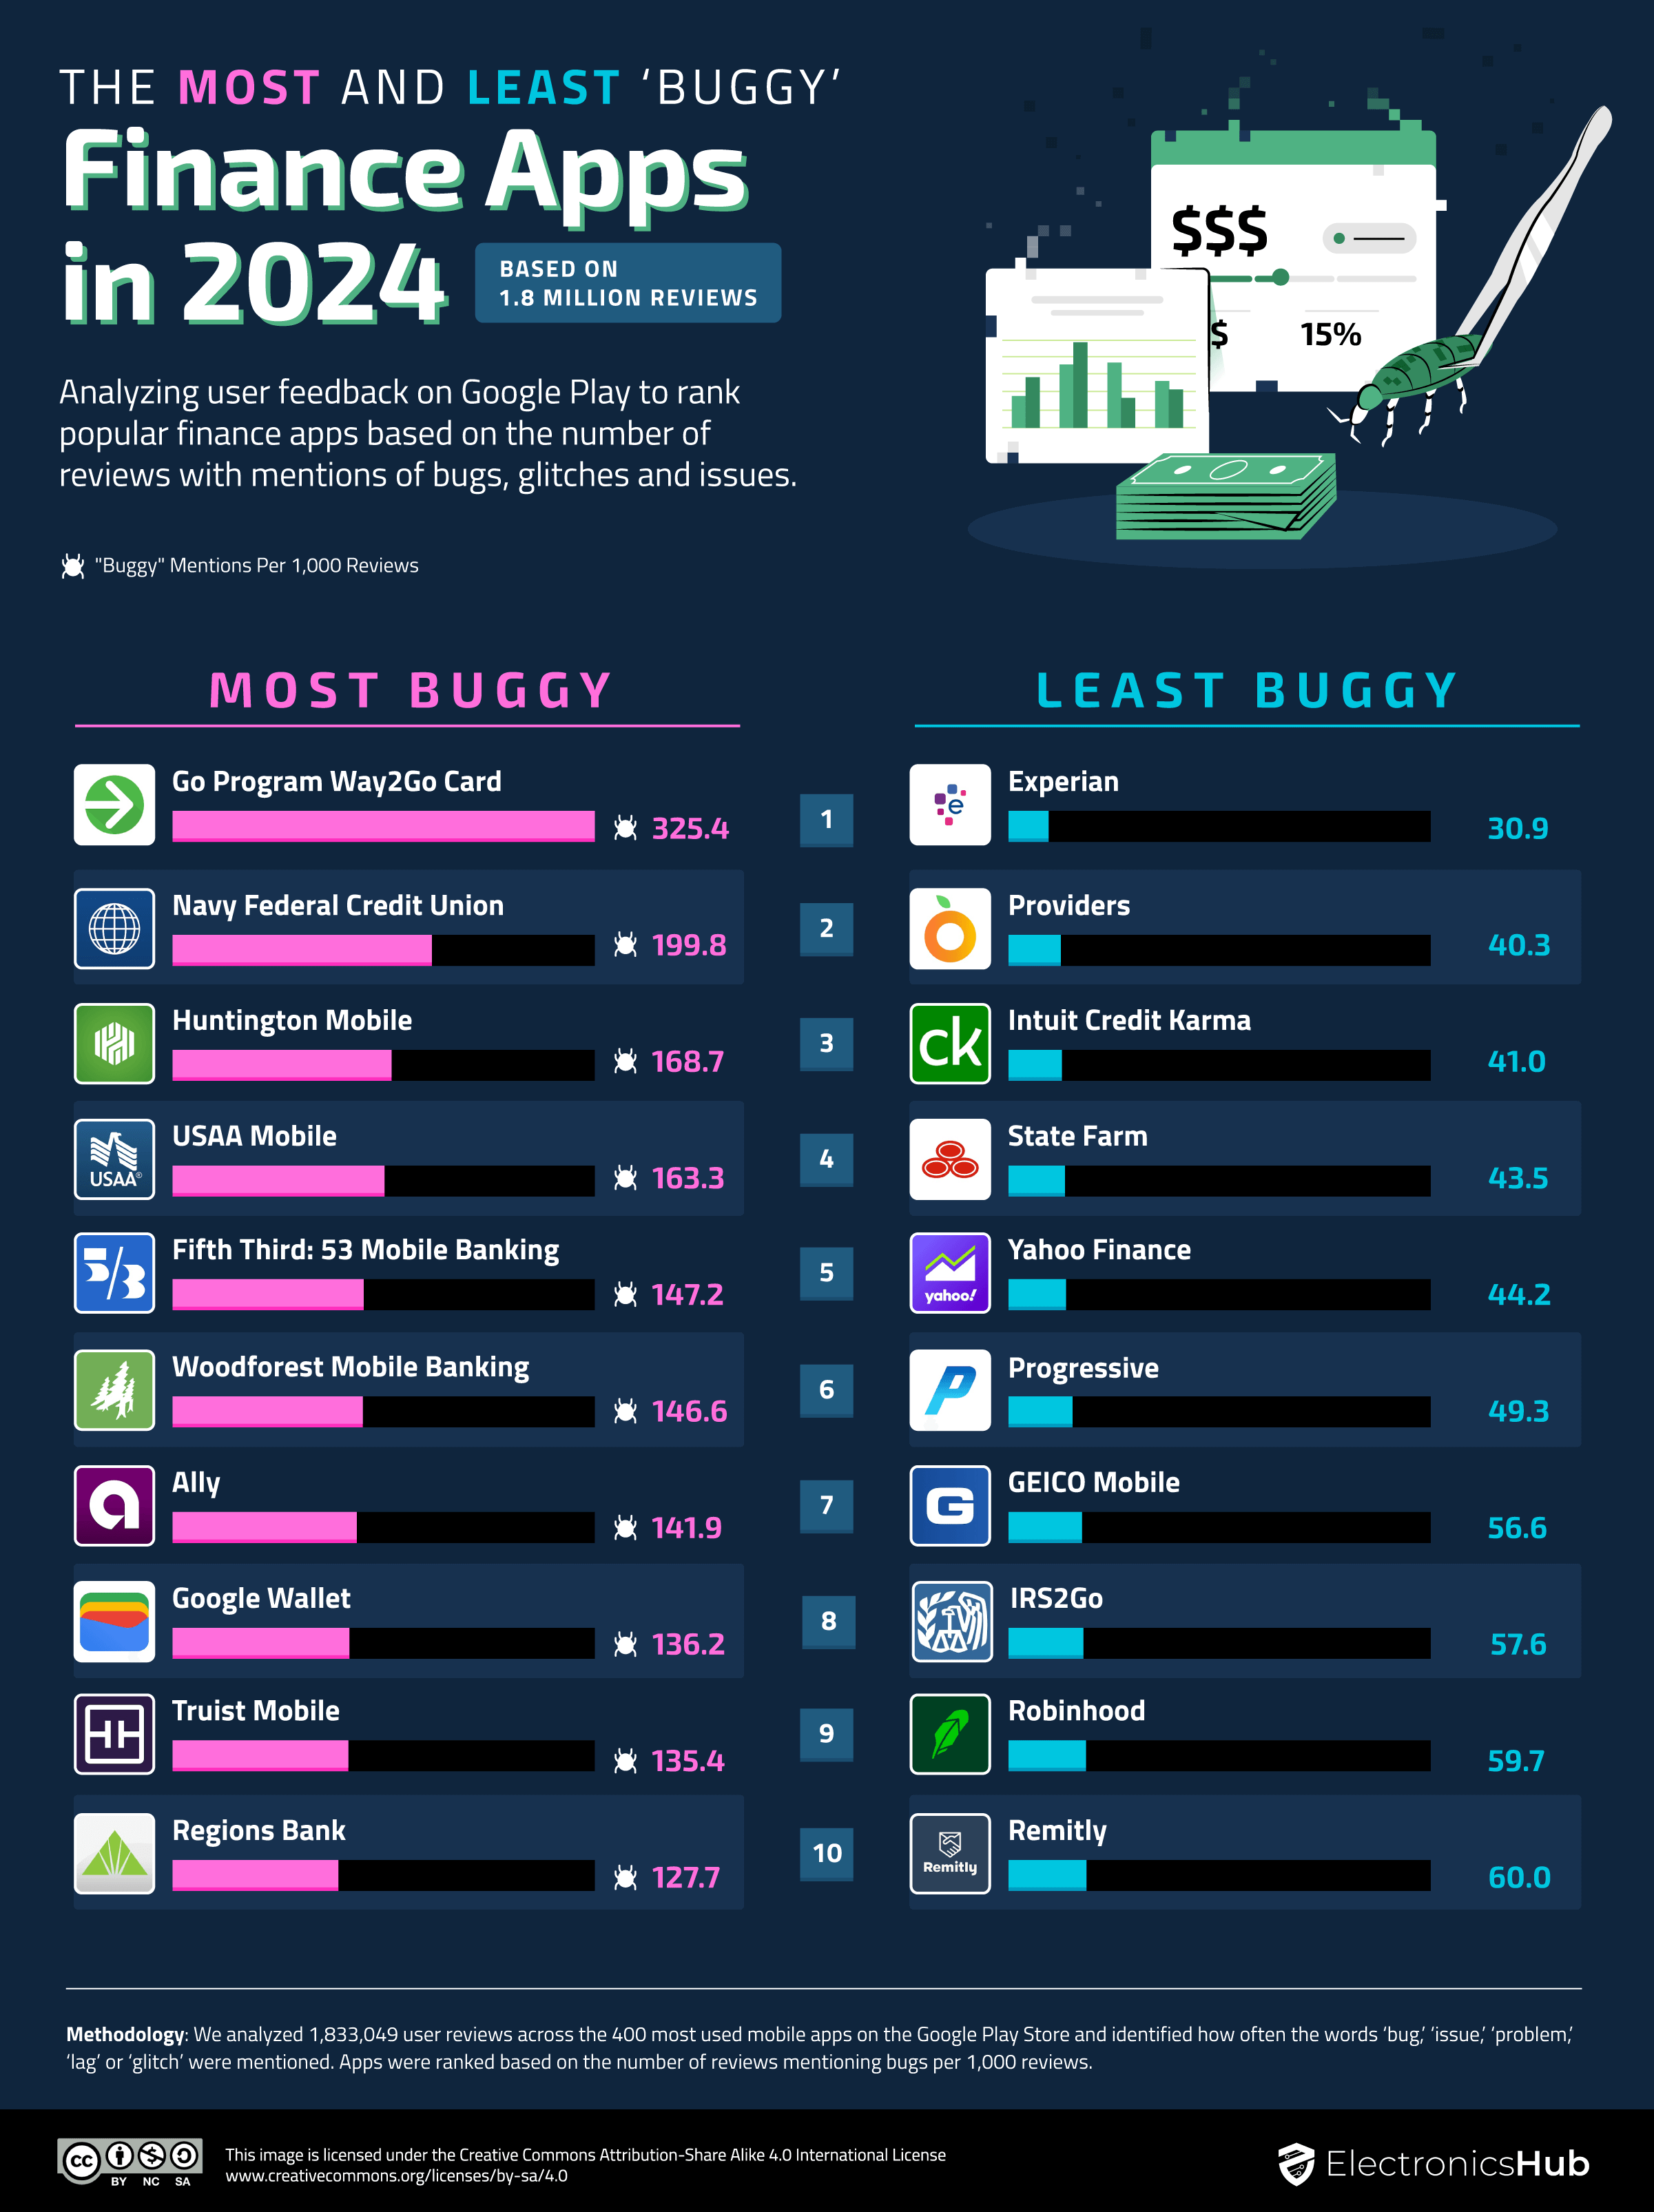 This infographic sheds light on the Finance apps that struggle with bugs and those that sail smoothly in 2024.